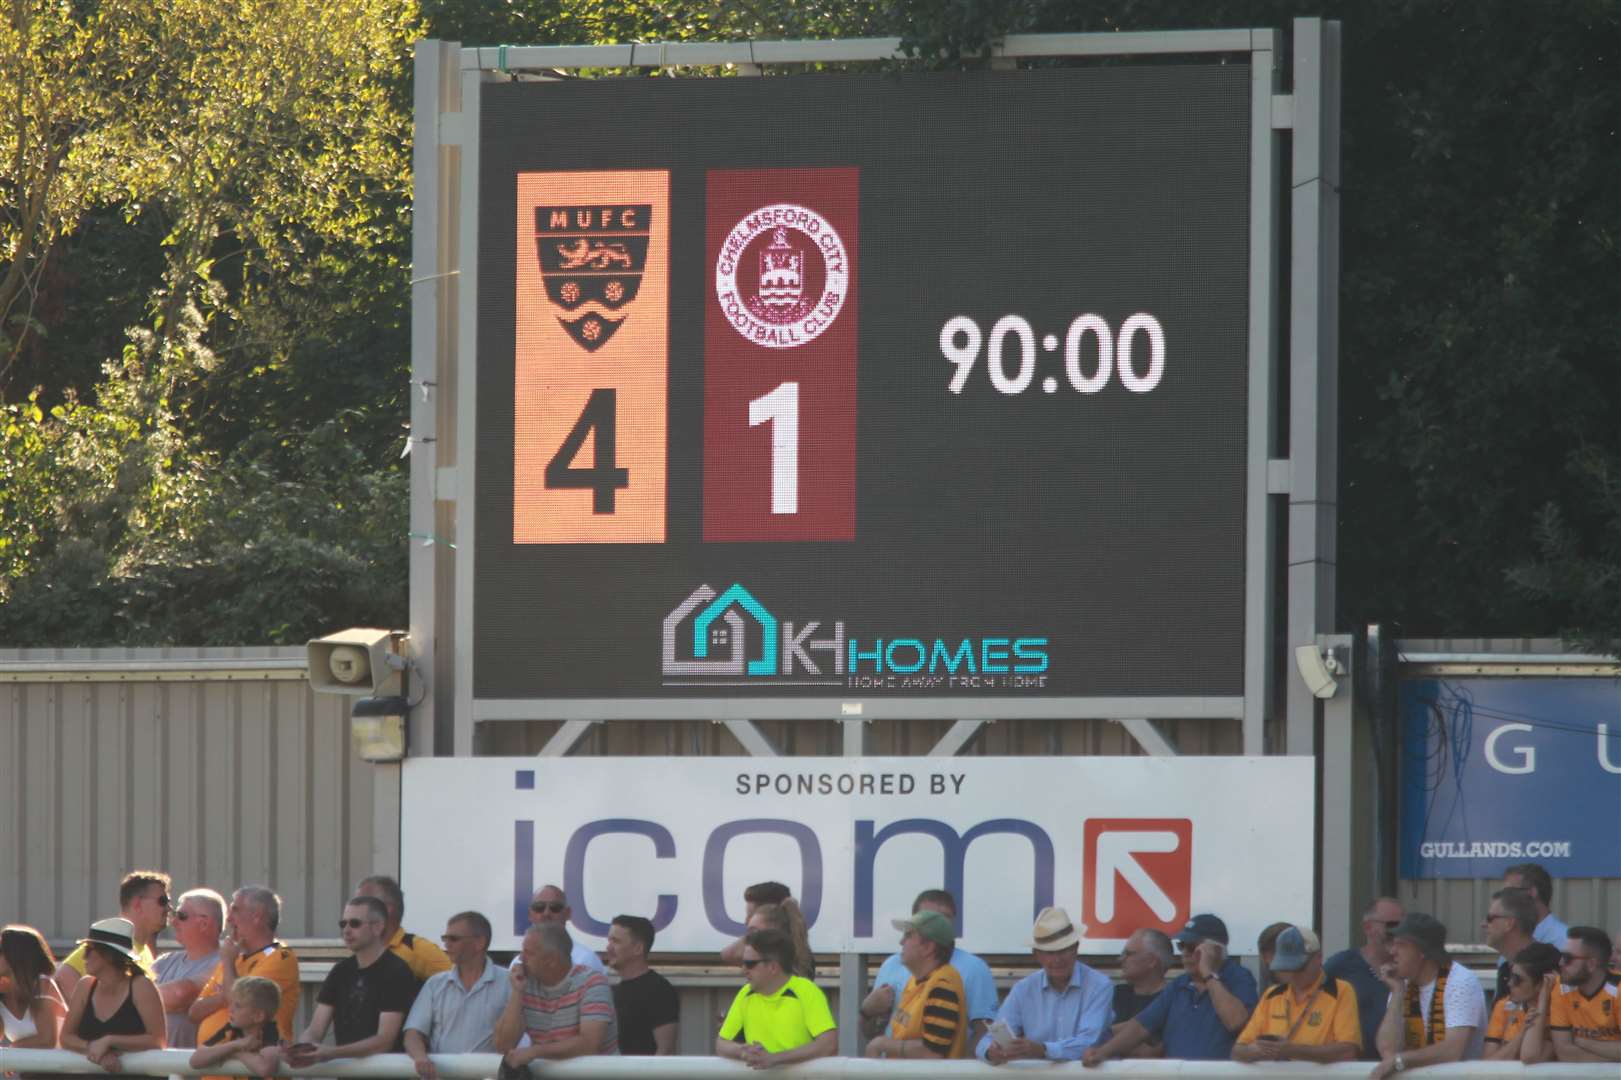 A first home win of the season for Maidstone Picture: John Westhrop